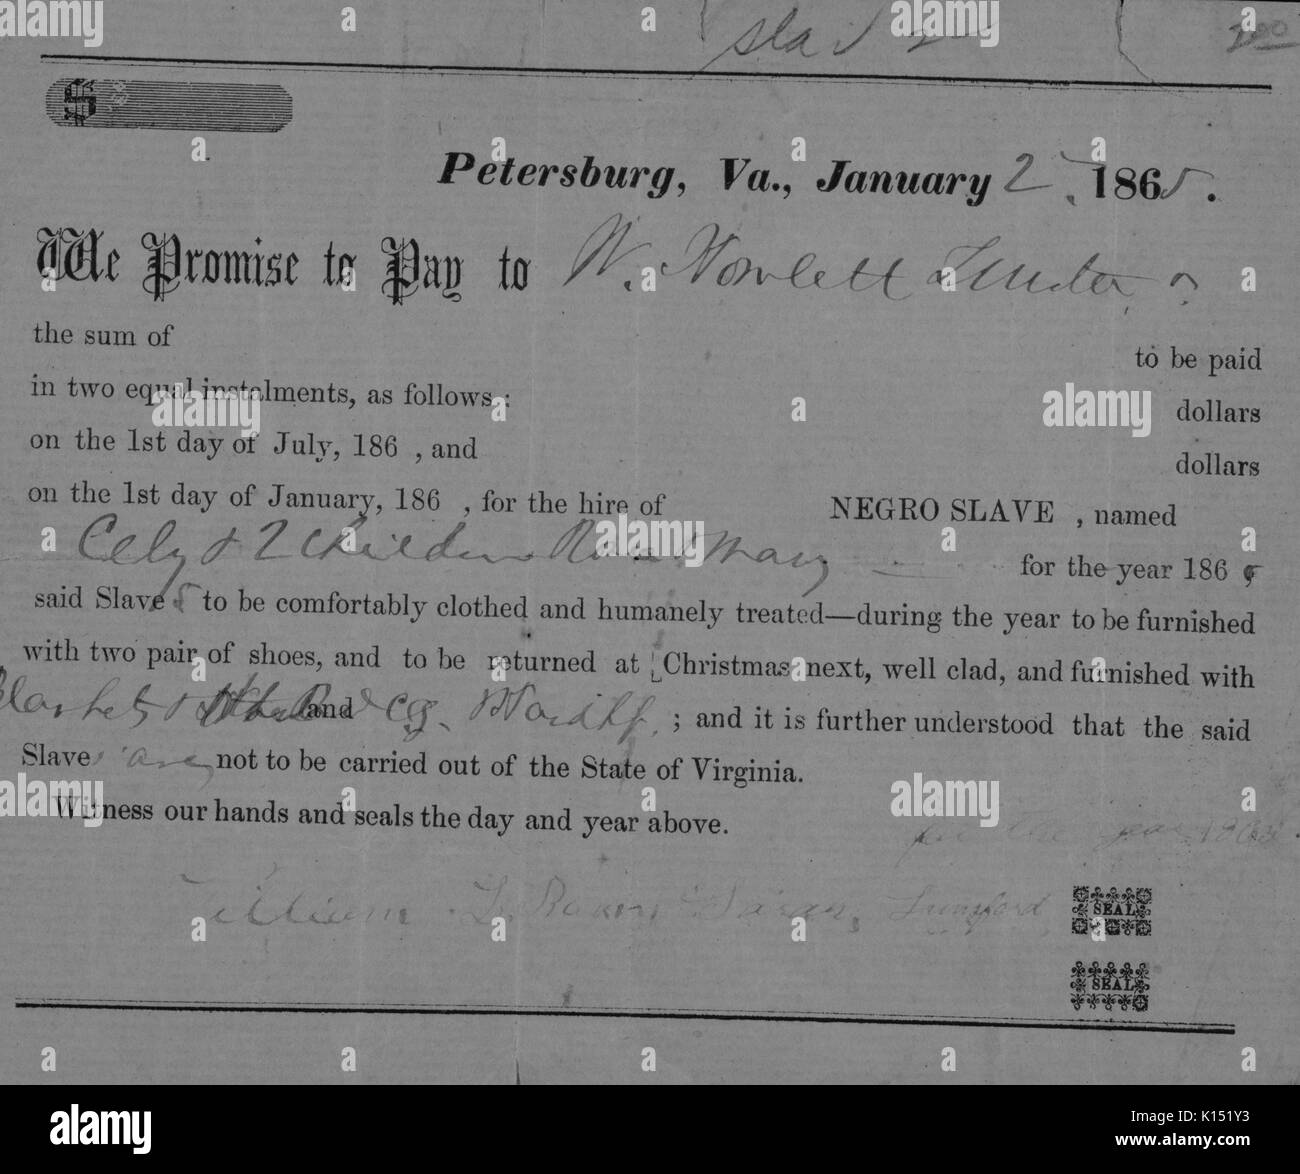 Promissory note for hire of slave Cely and two children, Petersburg, Virginia, 1865. From the New York Public Library. Stock Photo